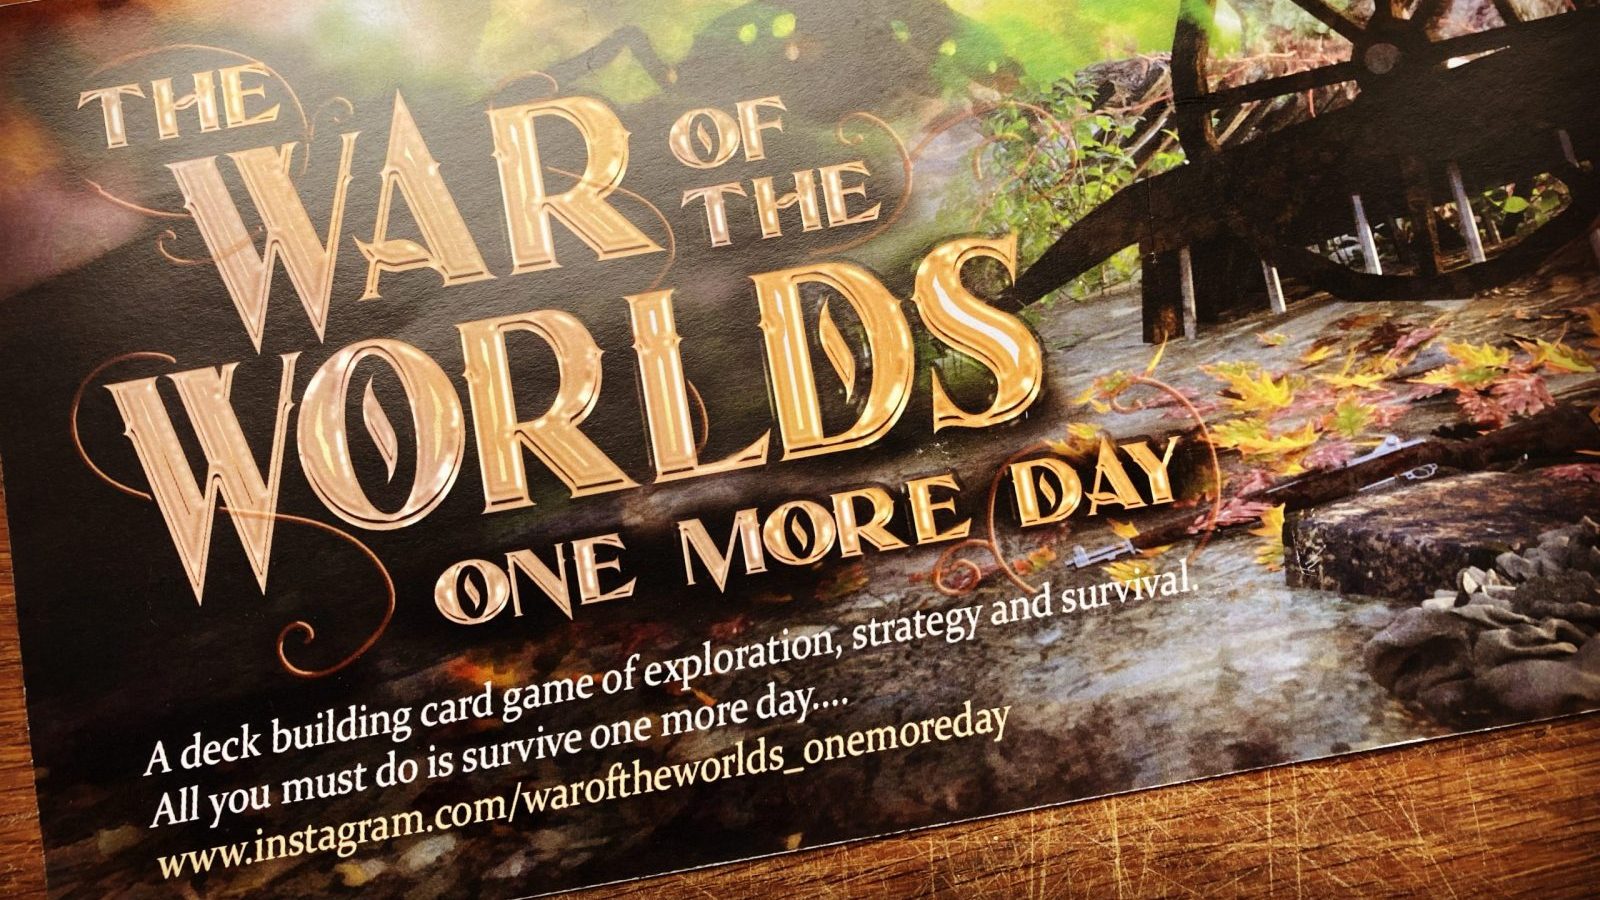 The War of the Worlds: One More Day